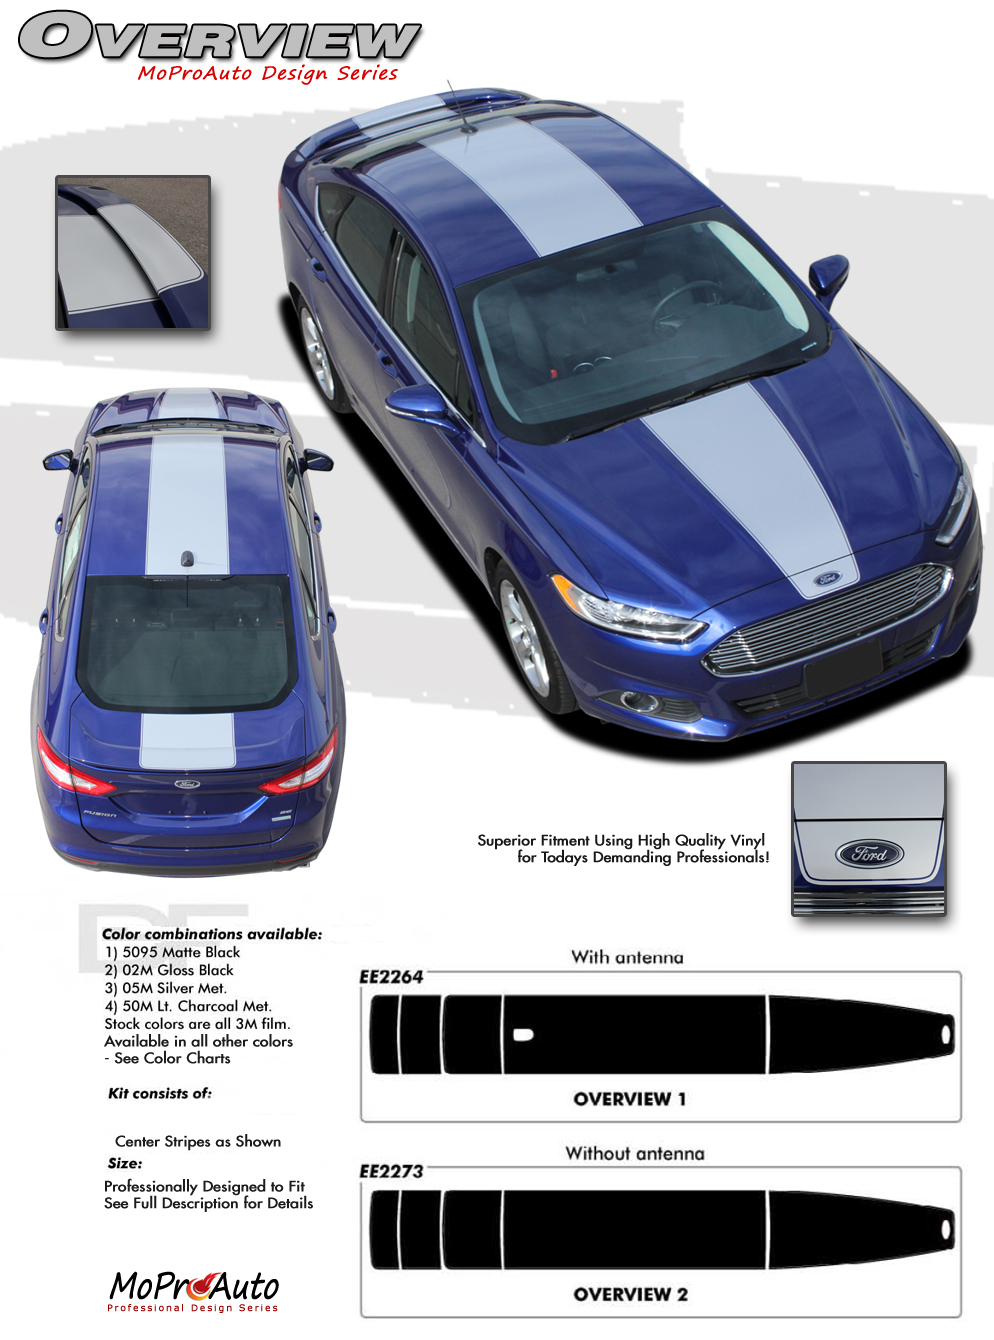 Ford Fusion OVERVIEW Vinyl Graphics, Stripes and Decals Set by MoProAuto